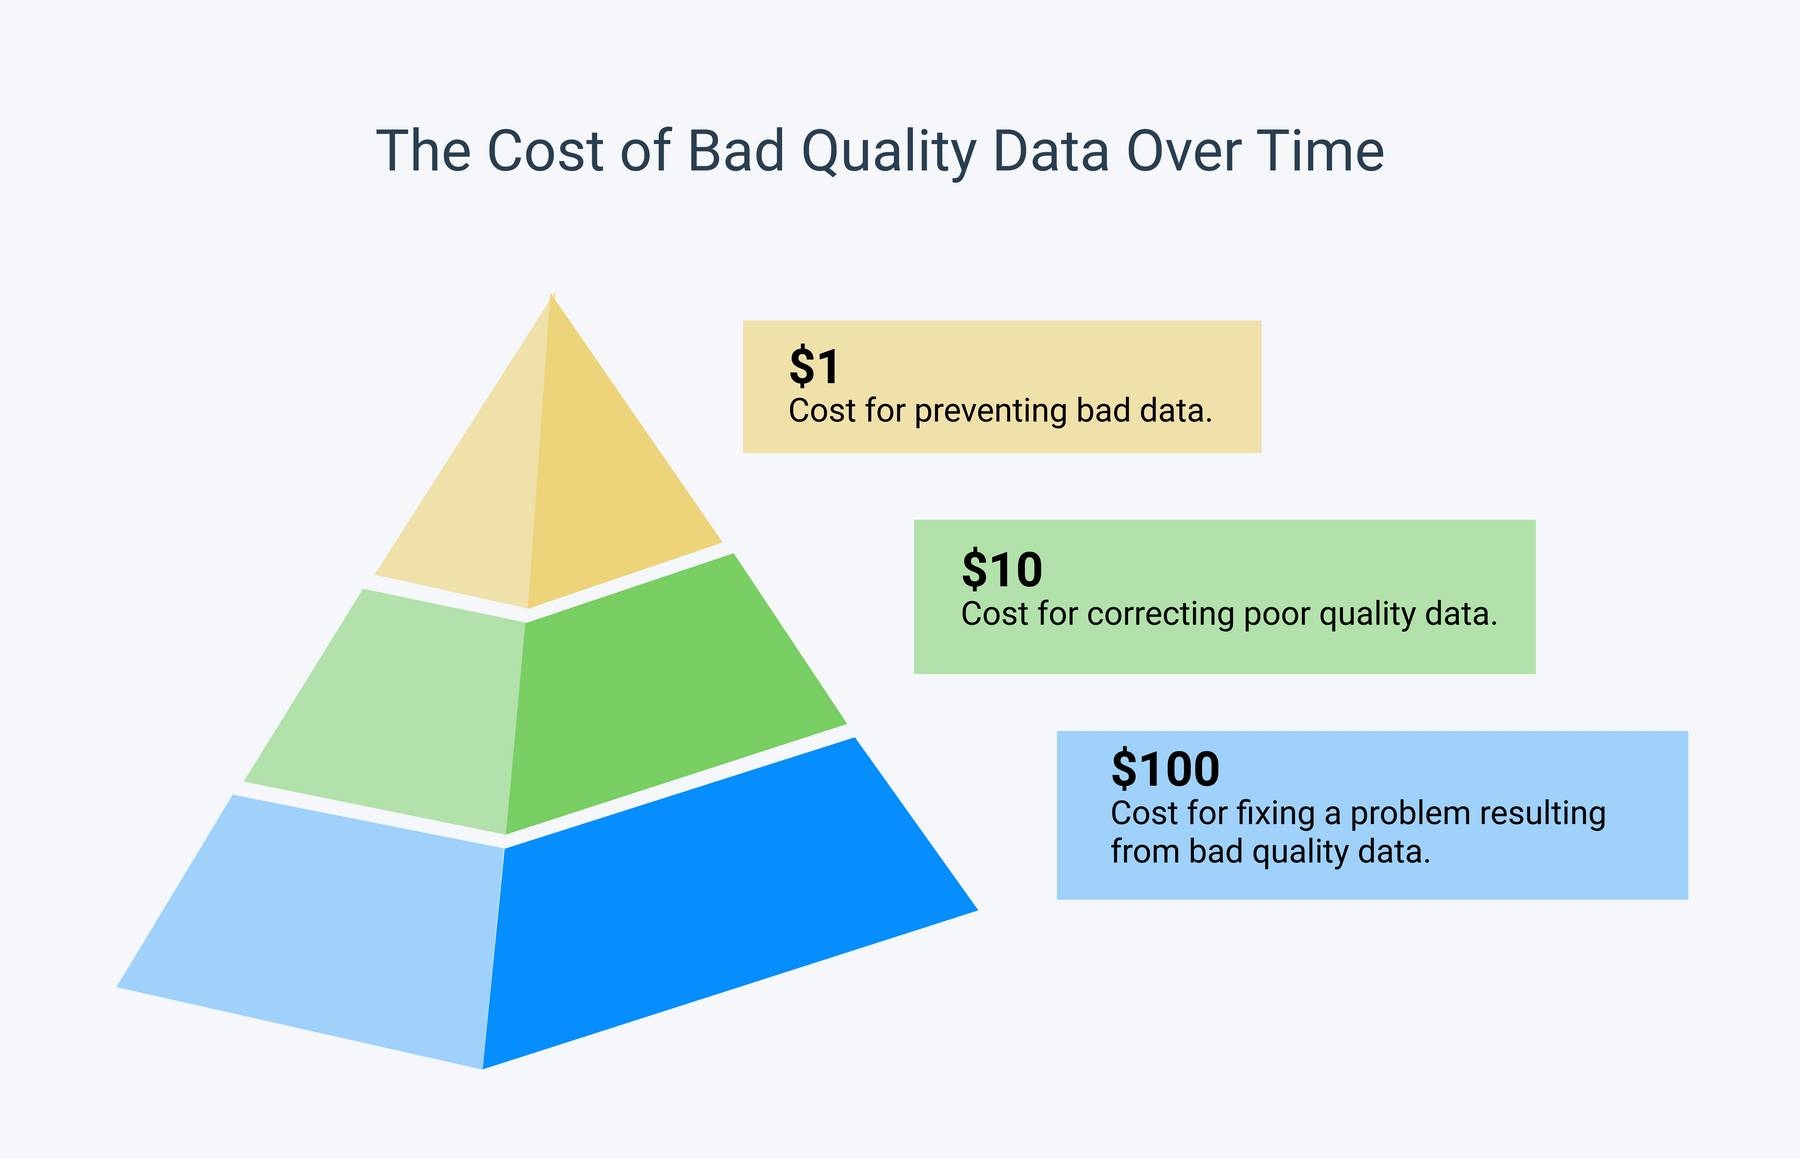 The 1-10-100 principle: $1 to prevent bad data, $10 to fix bad data, $100 to fix a downstream problem created by bad data.